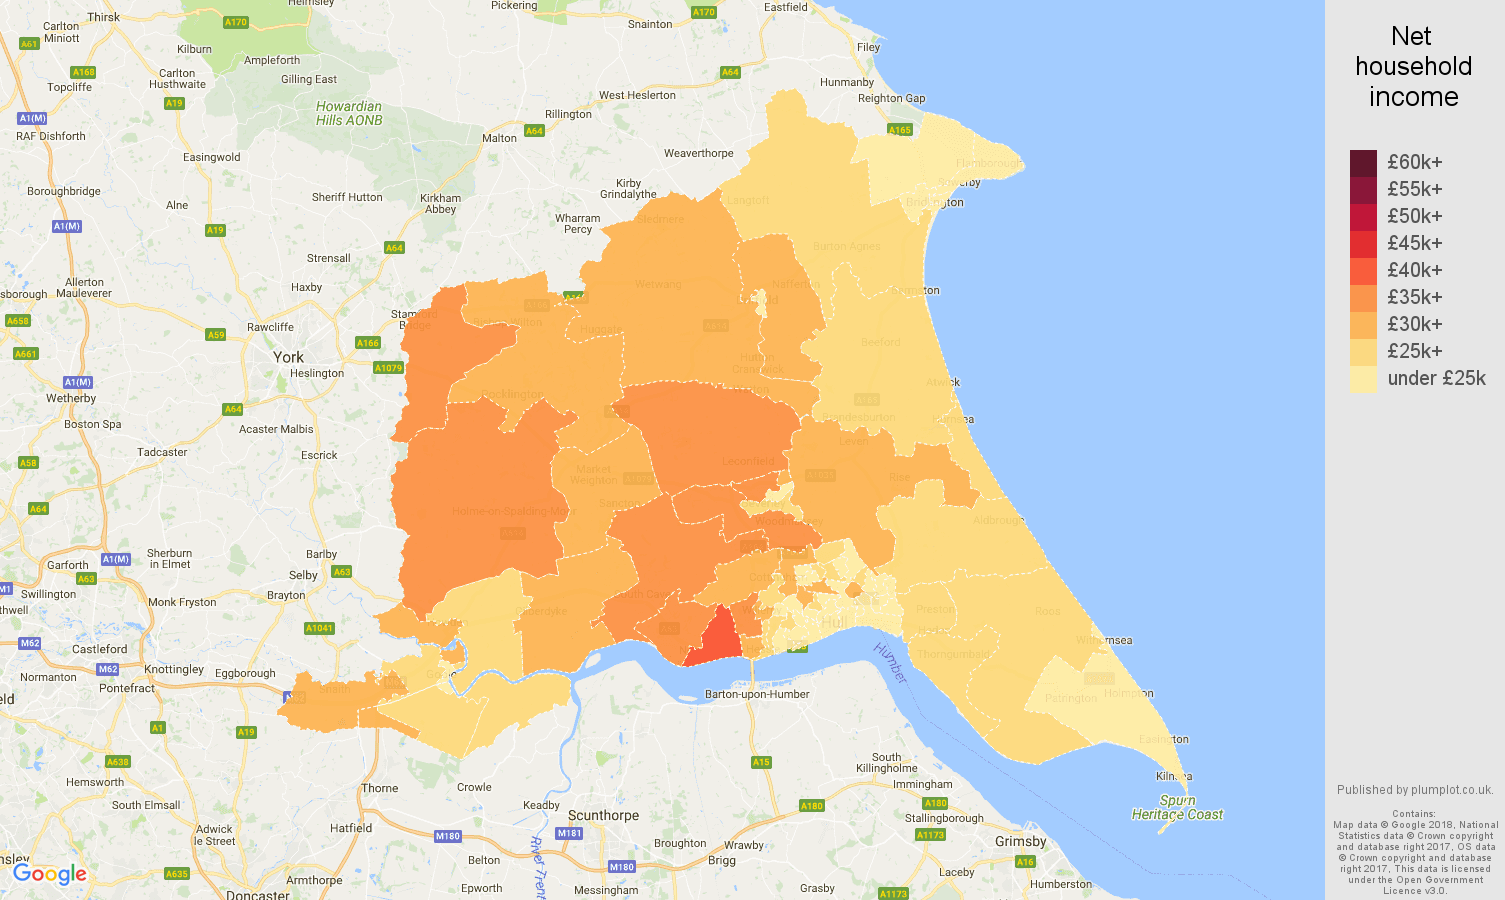 East Riding of Yorkshire net household income map